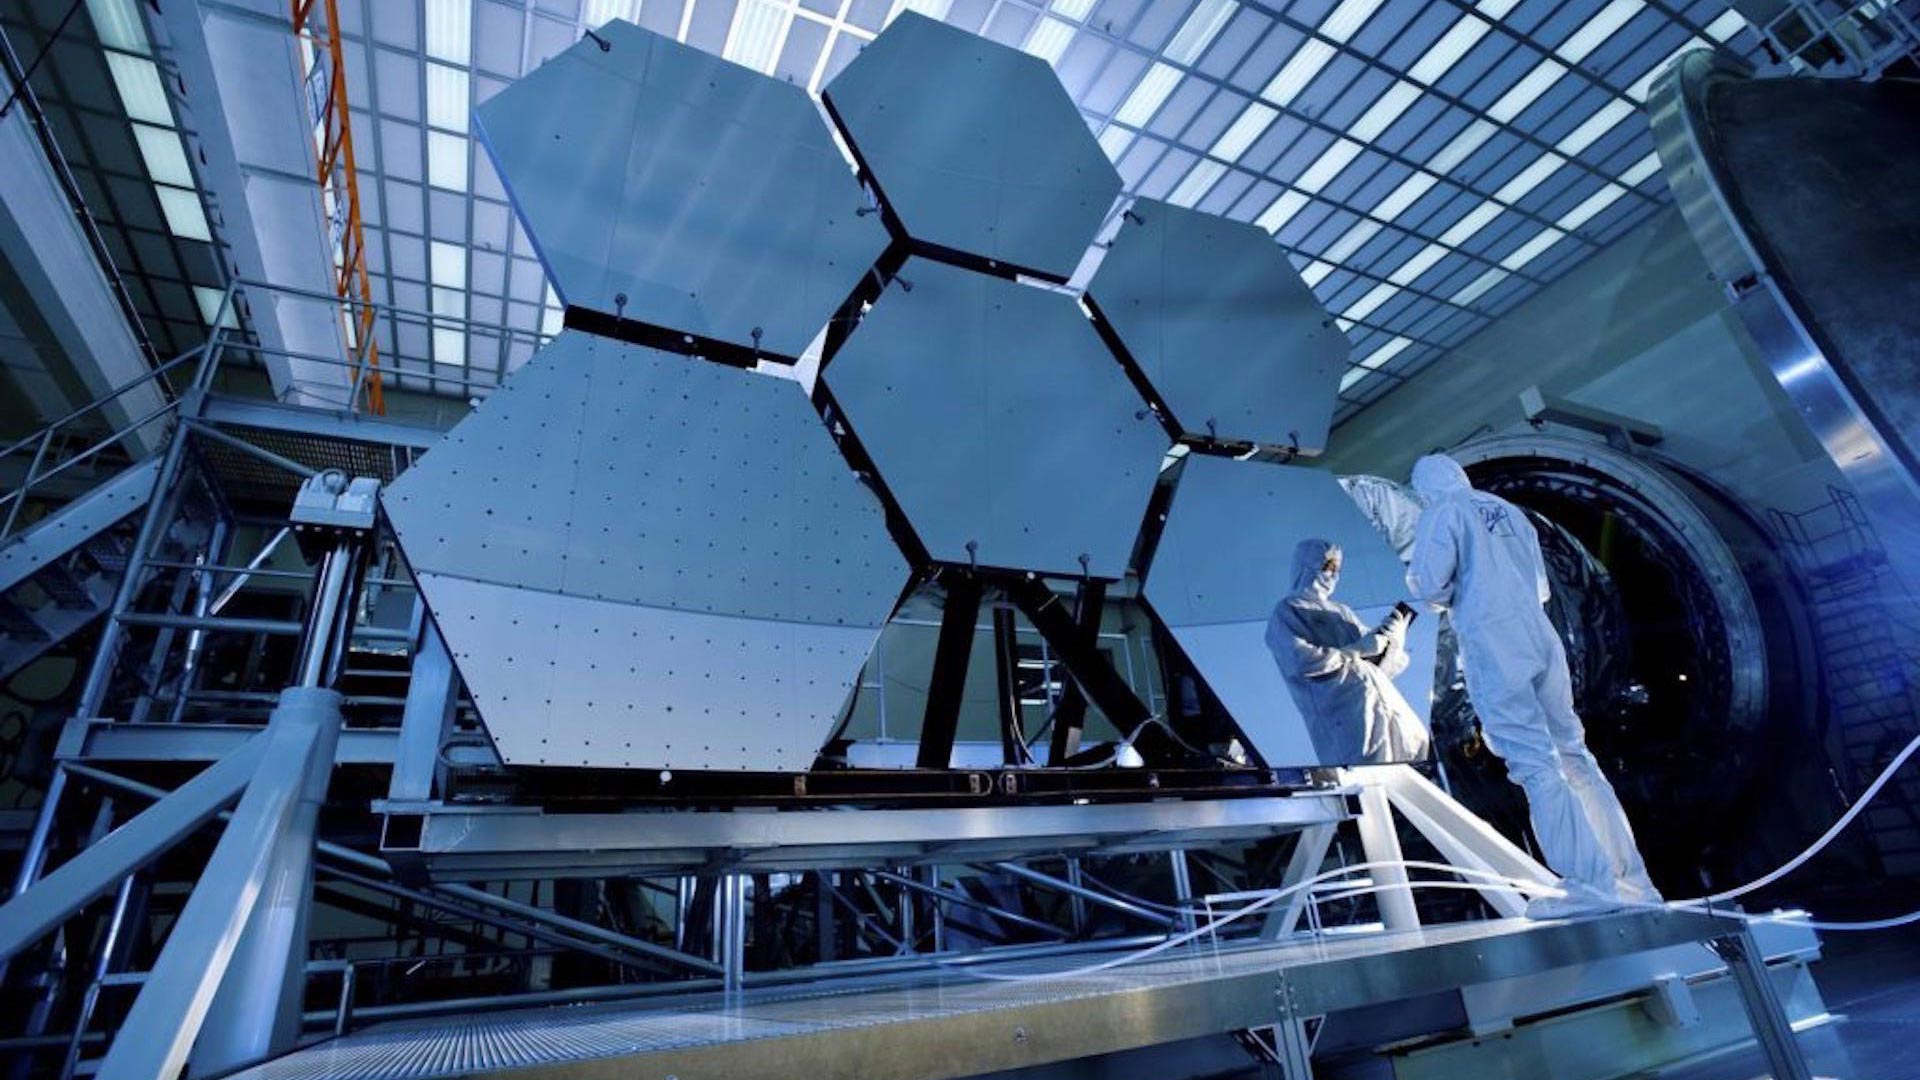 Optics for the James Webb Space Telescope underwent years of testing before preparation for launch.